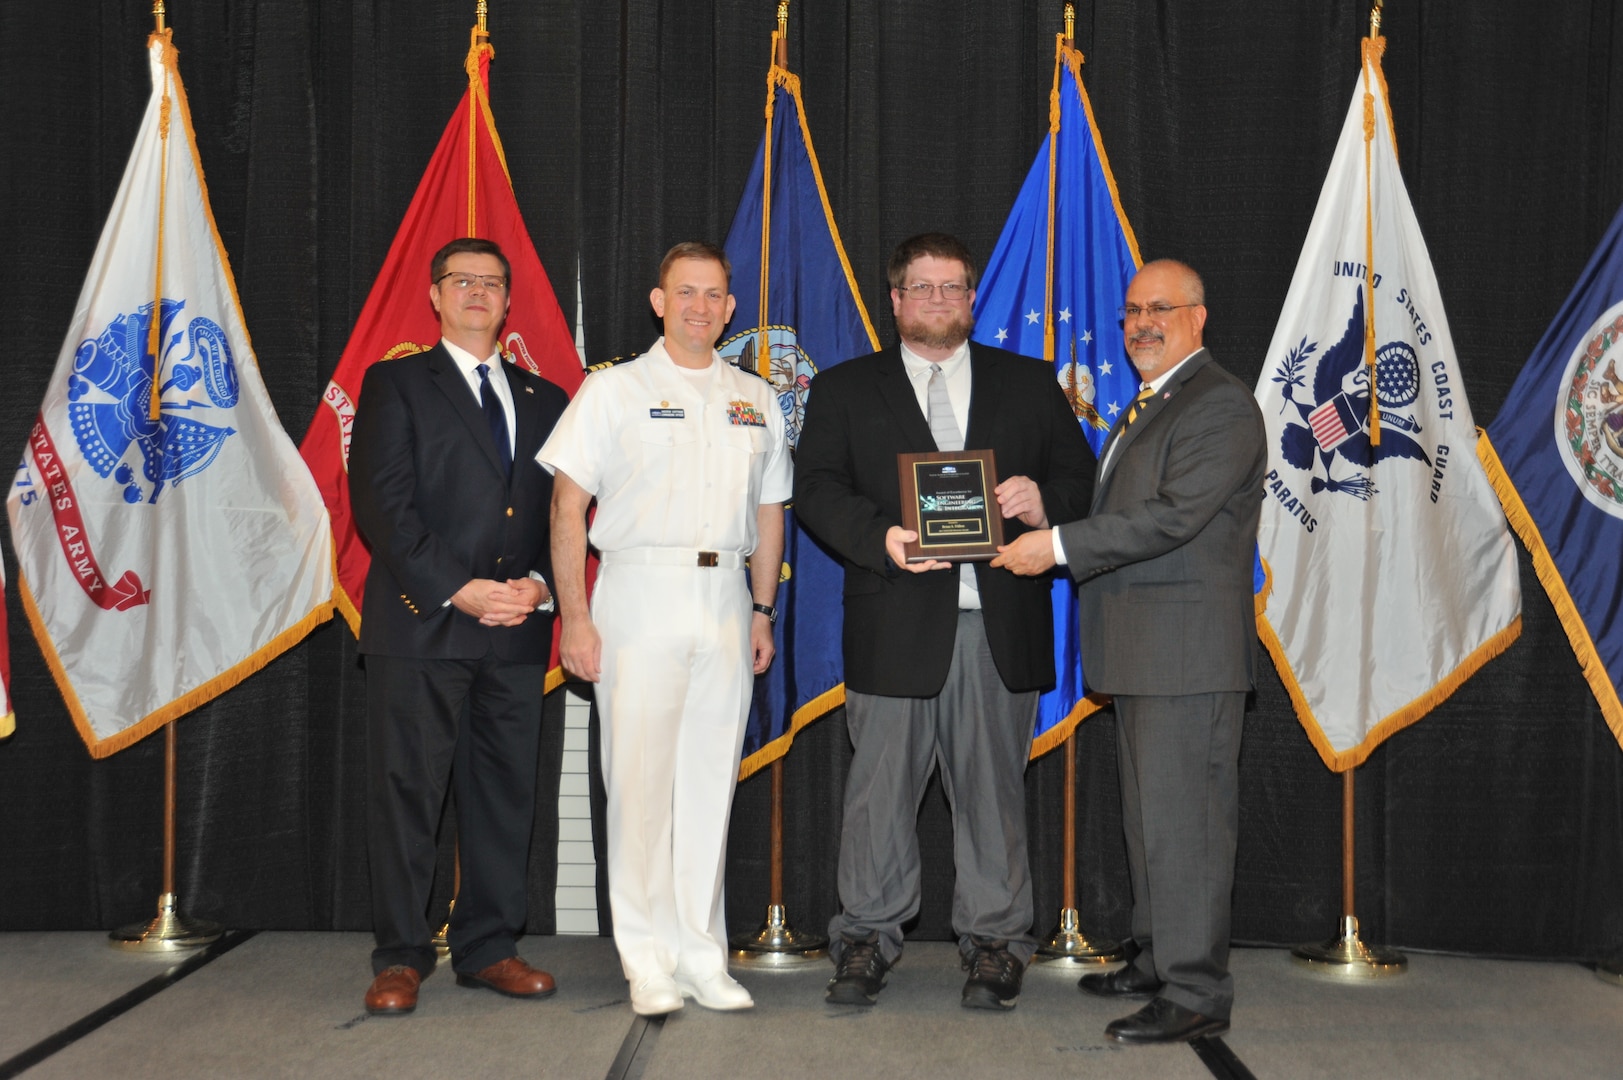 IMAGE: Brian Dillon is presented the  NSWCDD Award of Excellence for Software Engineering and Integration at Naval Surface Warfare Center Dahlgren Division's annual awards ceremony, Apr. 26 at the Fredericksburg Expo and Conference Center.

The NSWCDD Award of Excellence for Software Engineering and Integration was established to recognize individuals who have made a notable and significant impact to NSWCDD through their outstanding performance in Software Engineering & Integration.